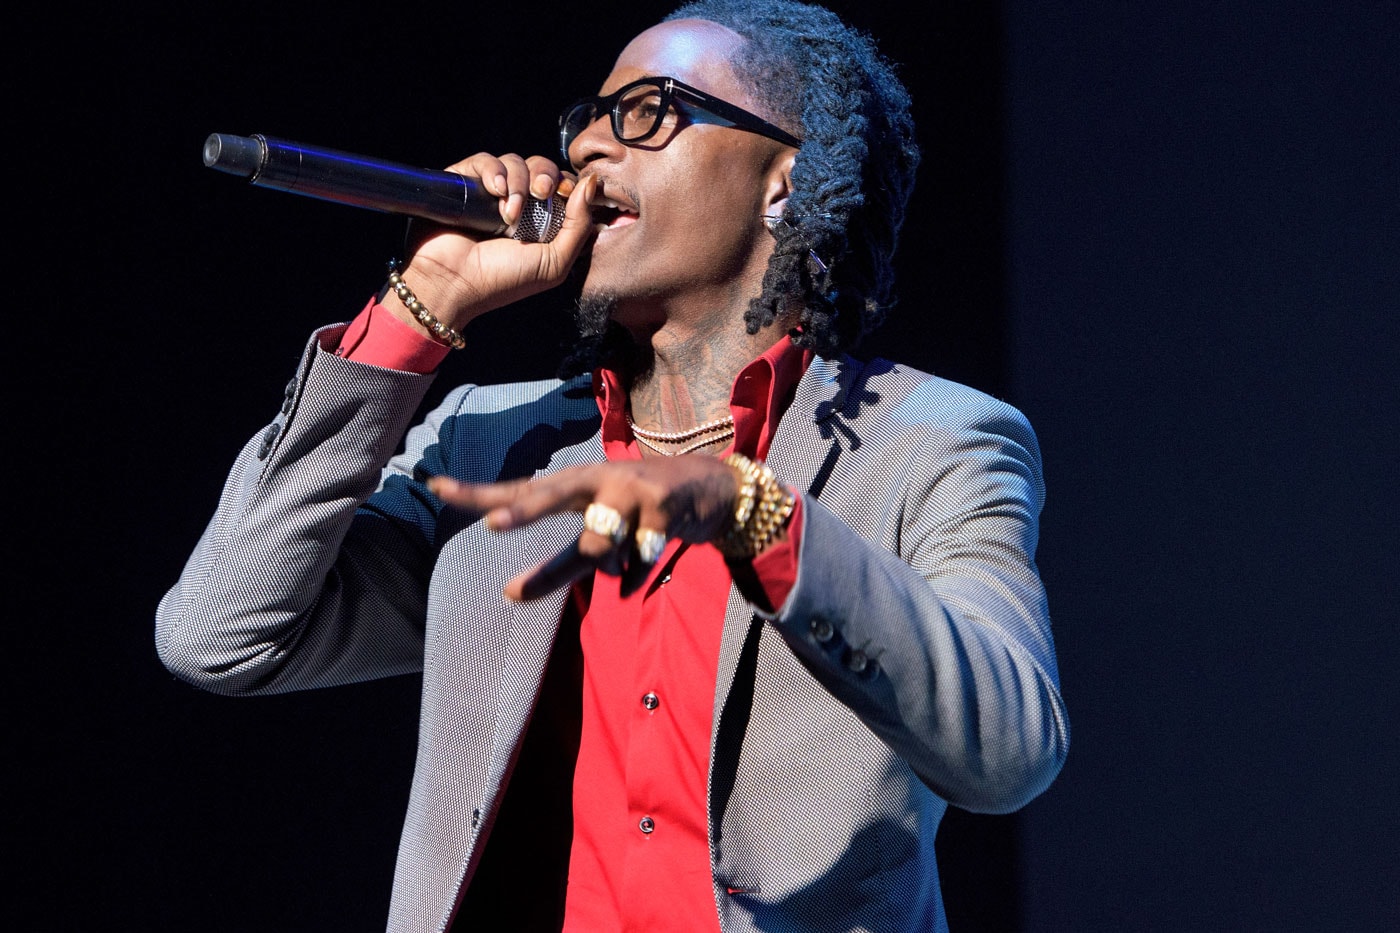 Listen to Three New Songs From Rich Homie Quan